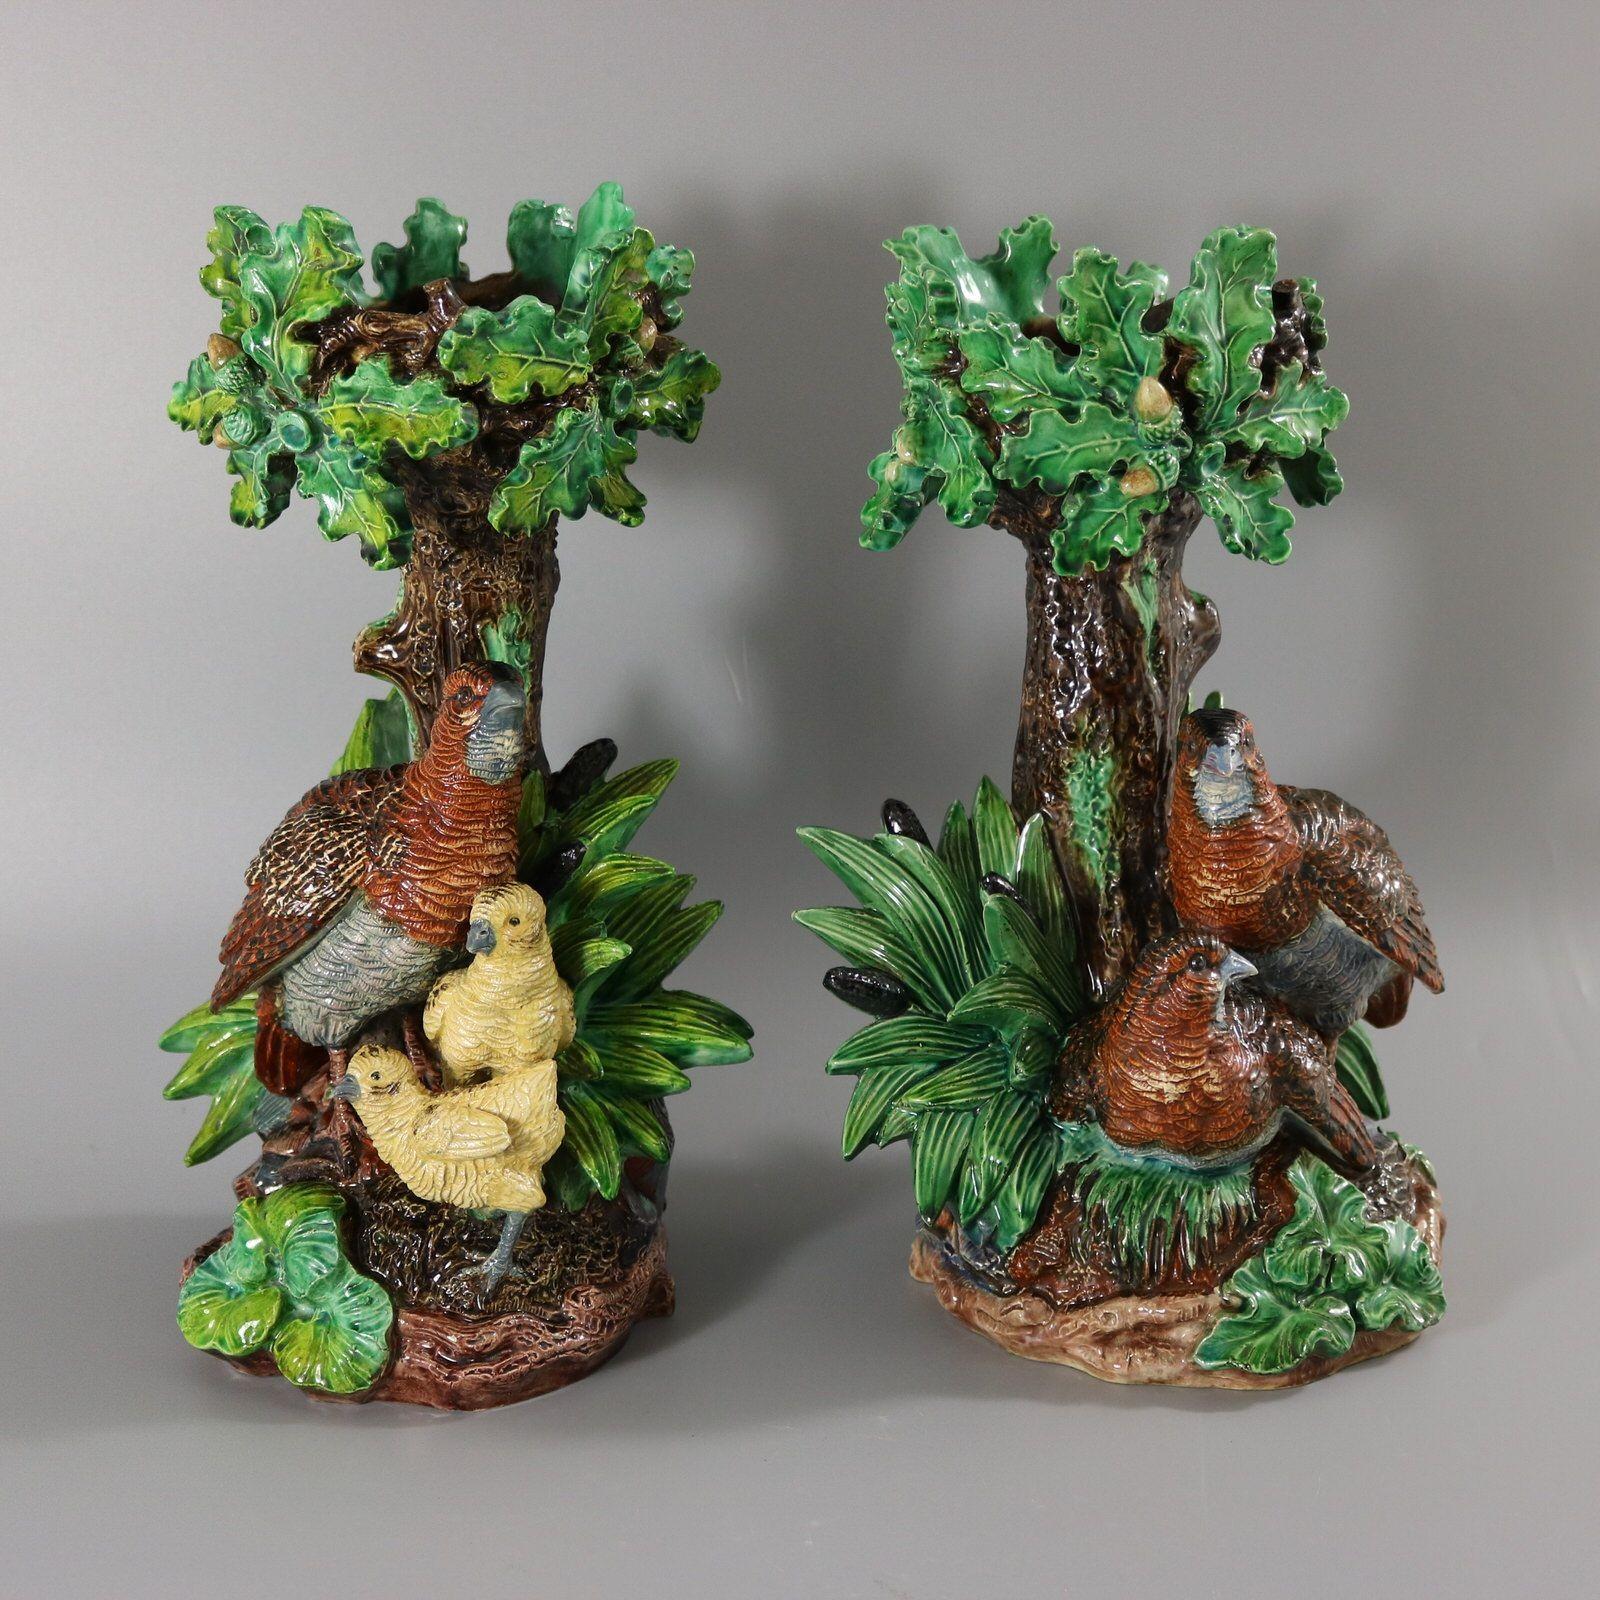 Pair of Lonitz Majolica cache pot stands which feature partridges in front of an oak tree, with reeds and bulrushes (cattails) either side. One partridge is looking after her young chicks. Colouration: green, brown, yellow, are predominant. The